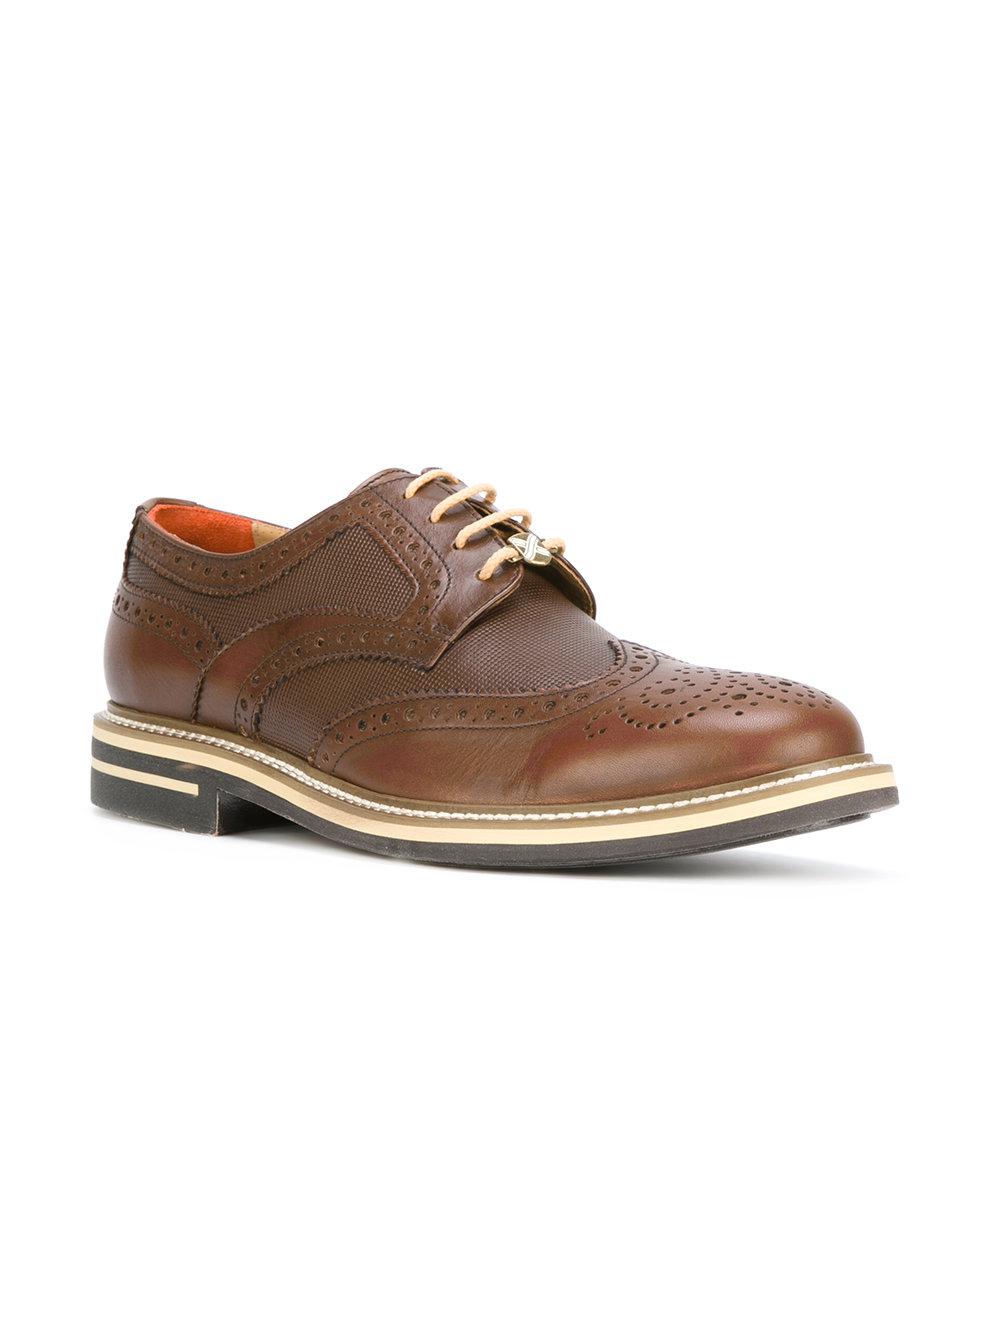 Brimarts Lace-up Shoes in Brown for Men - Lyst